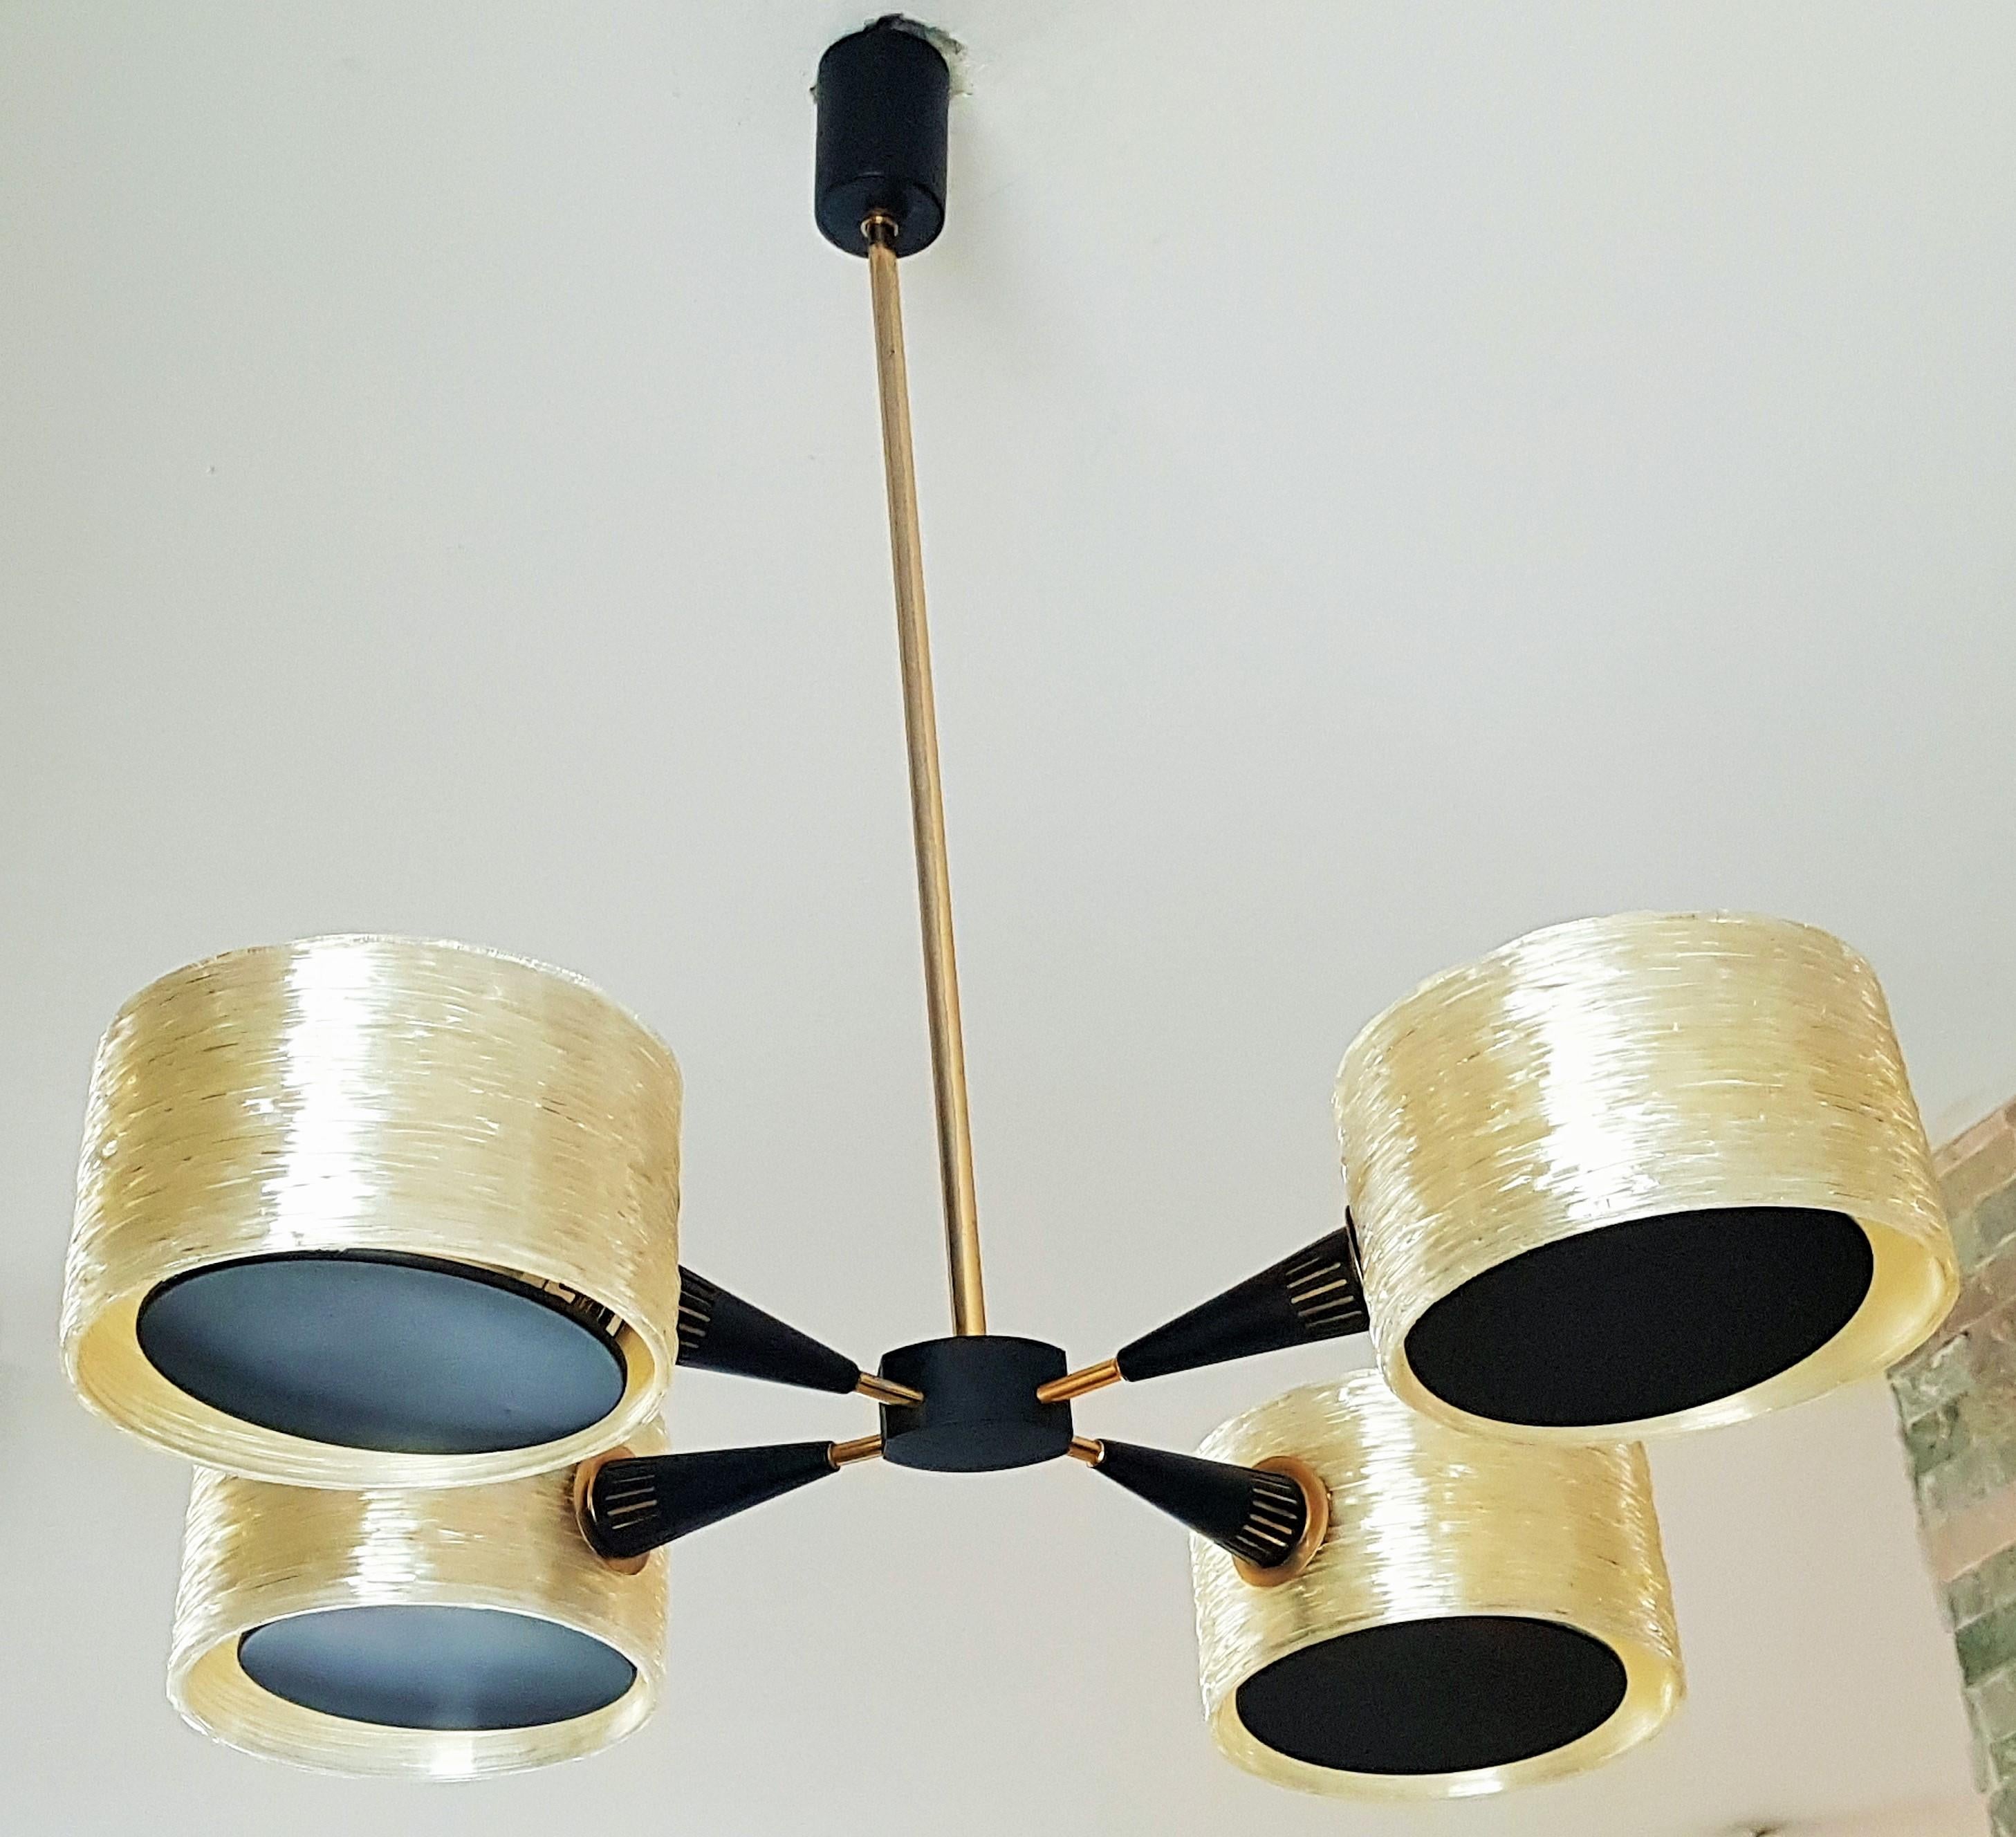 Midcentury Chandelier Brass and Perspex Resin by Lunel Arlus, France, 1960 For Sale 1